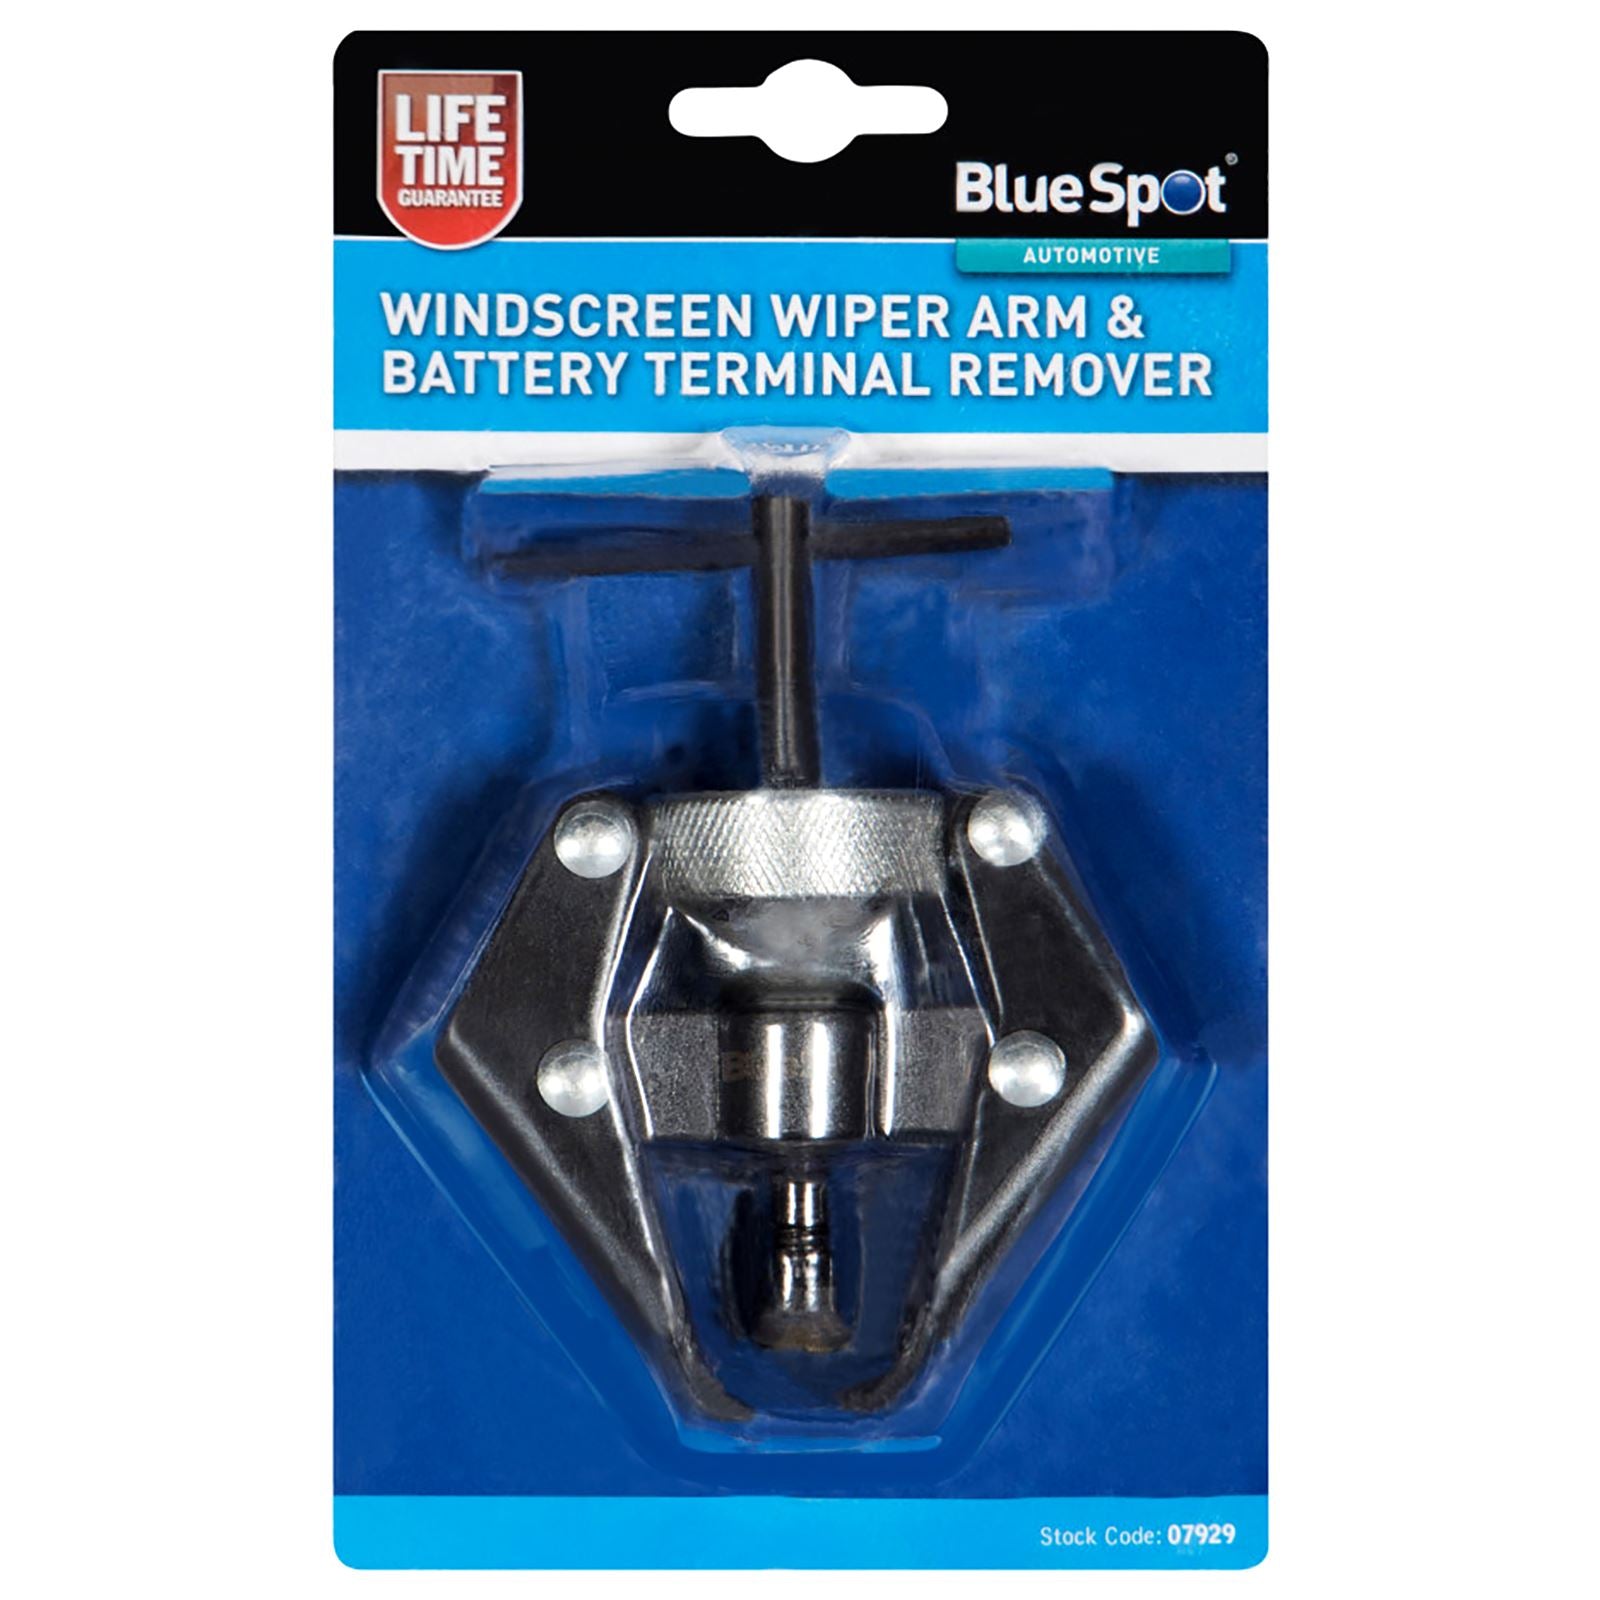 BlueSpot Windscreen Wiper Arm and Battery Terminal Remover